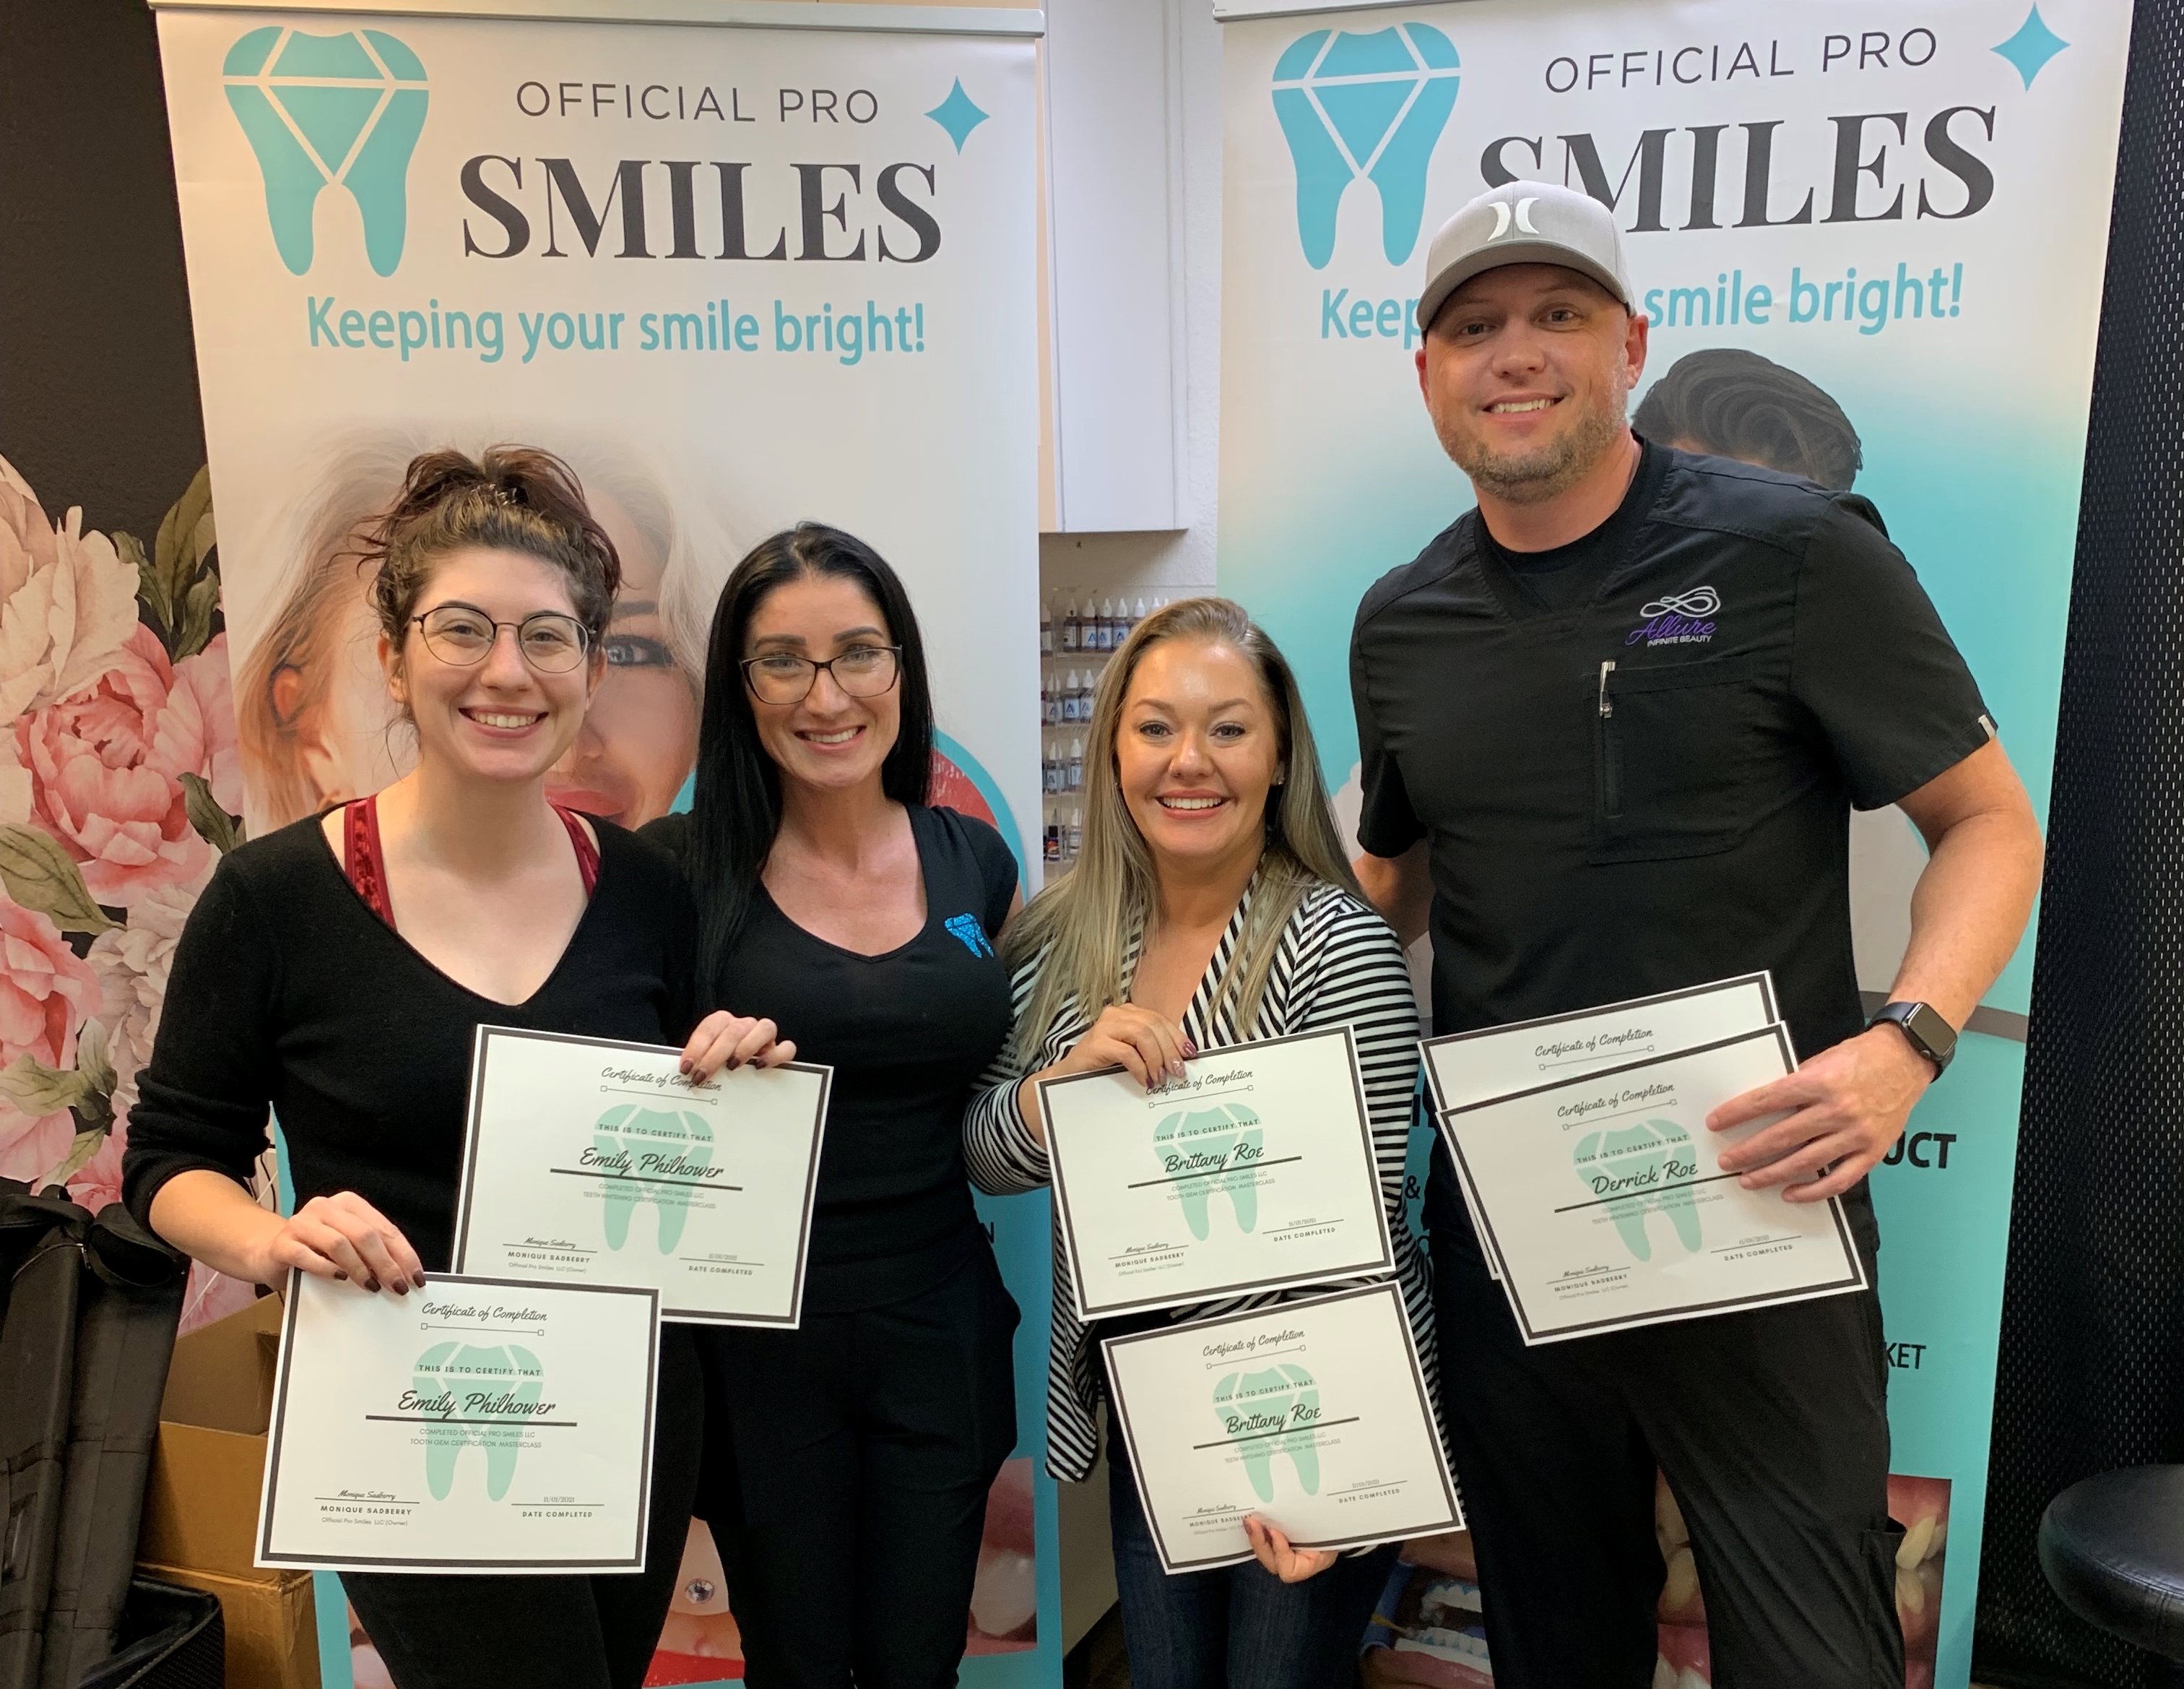 Teeth whitening training & tooth gem training by Official Pro Smiles